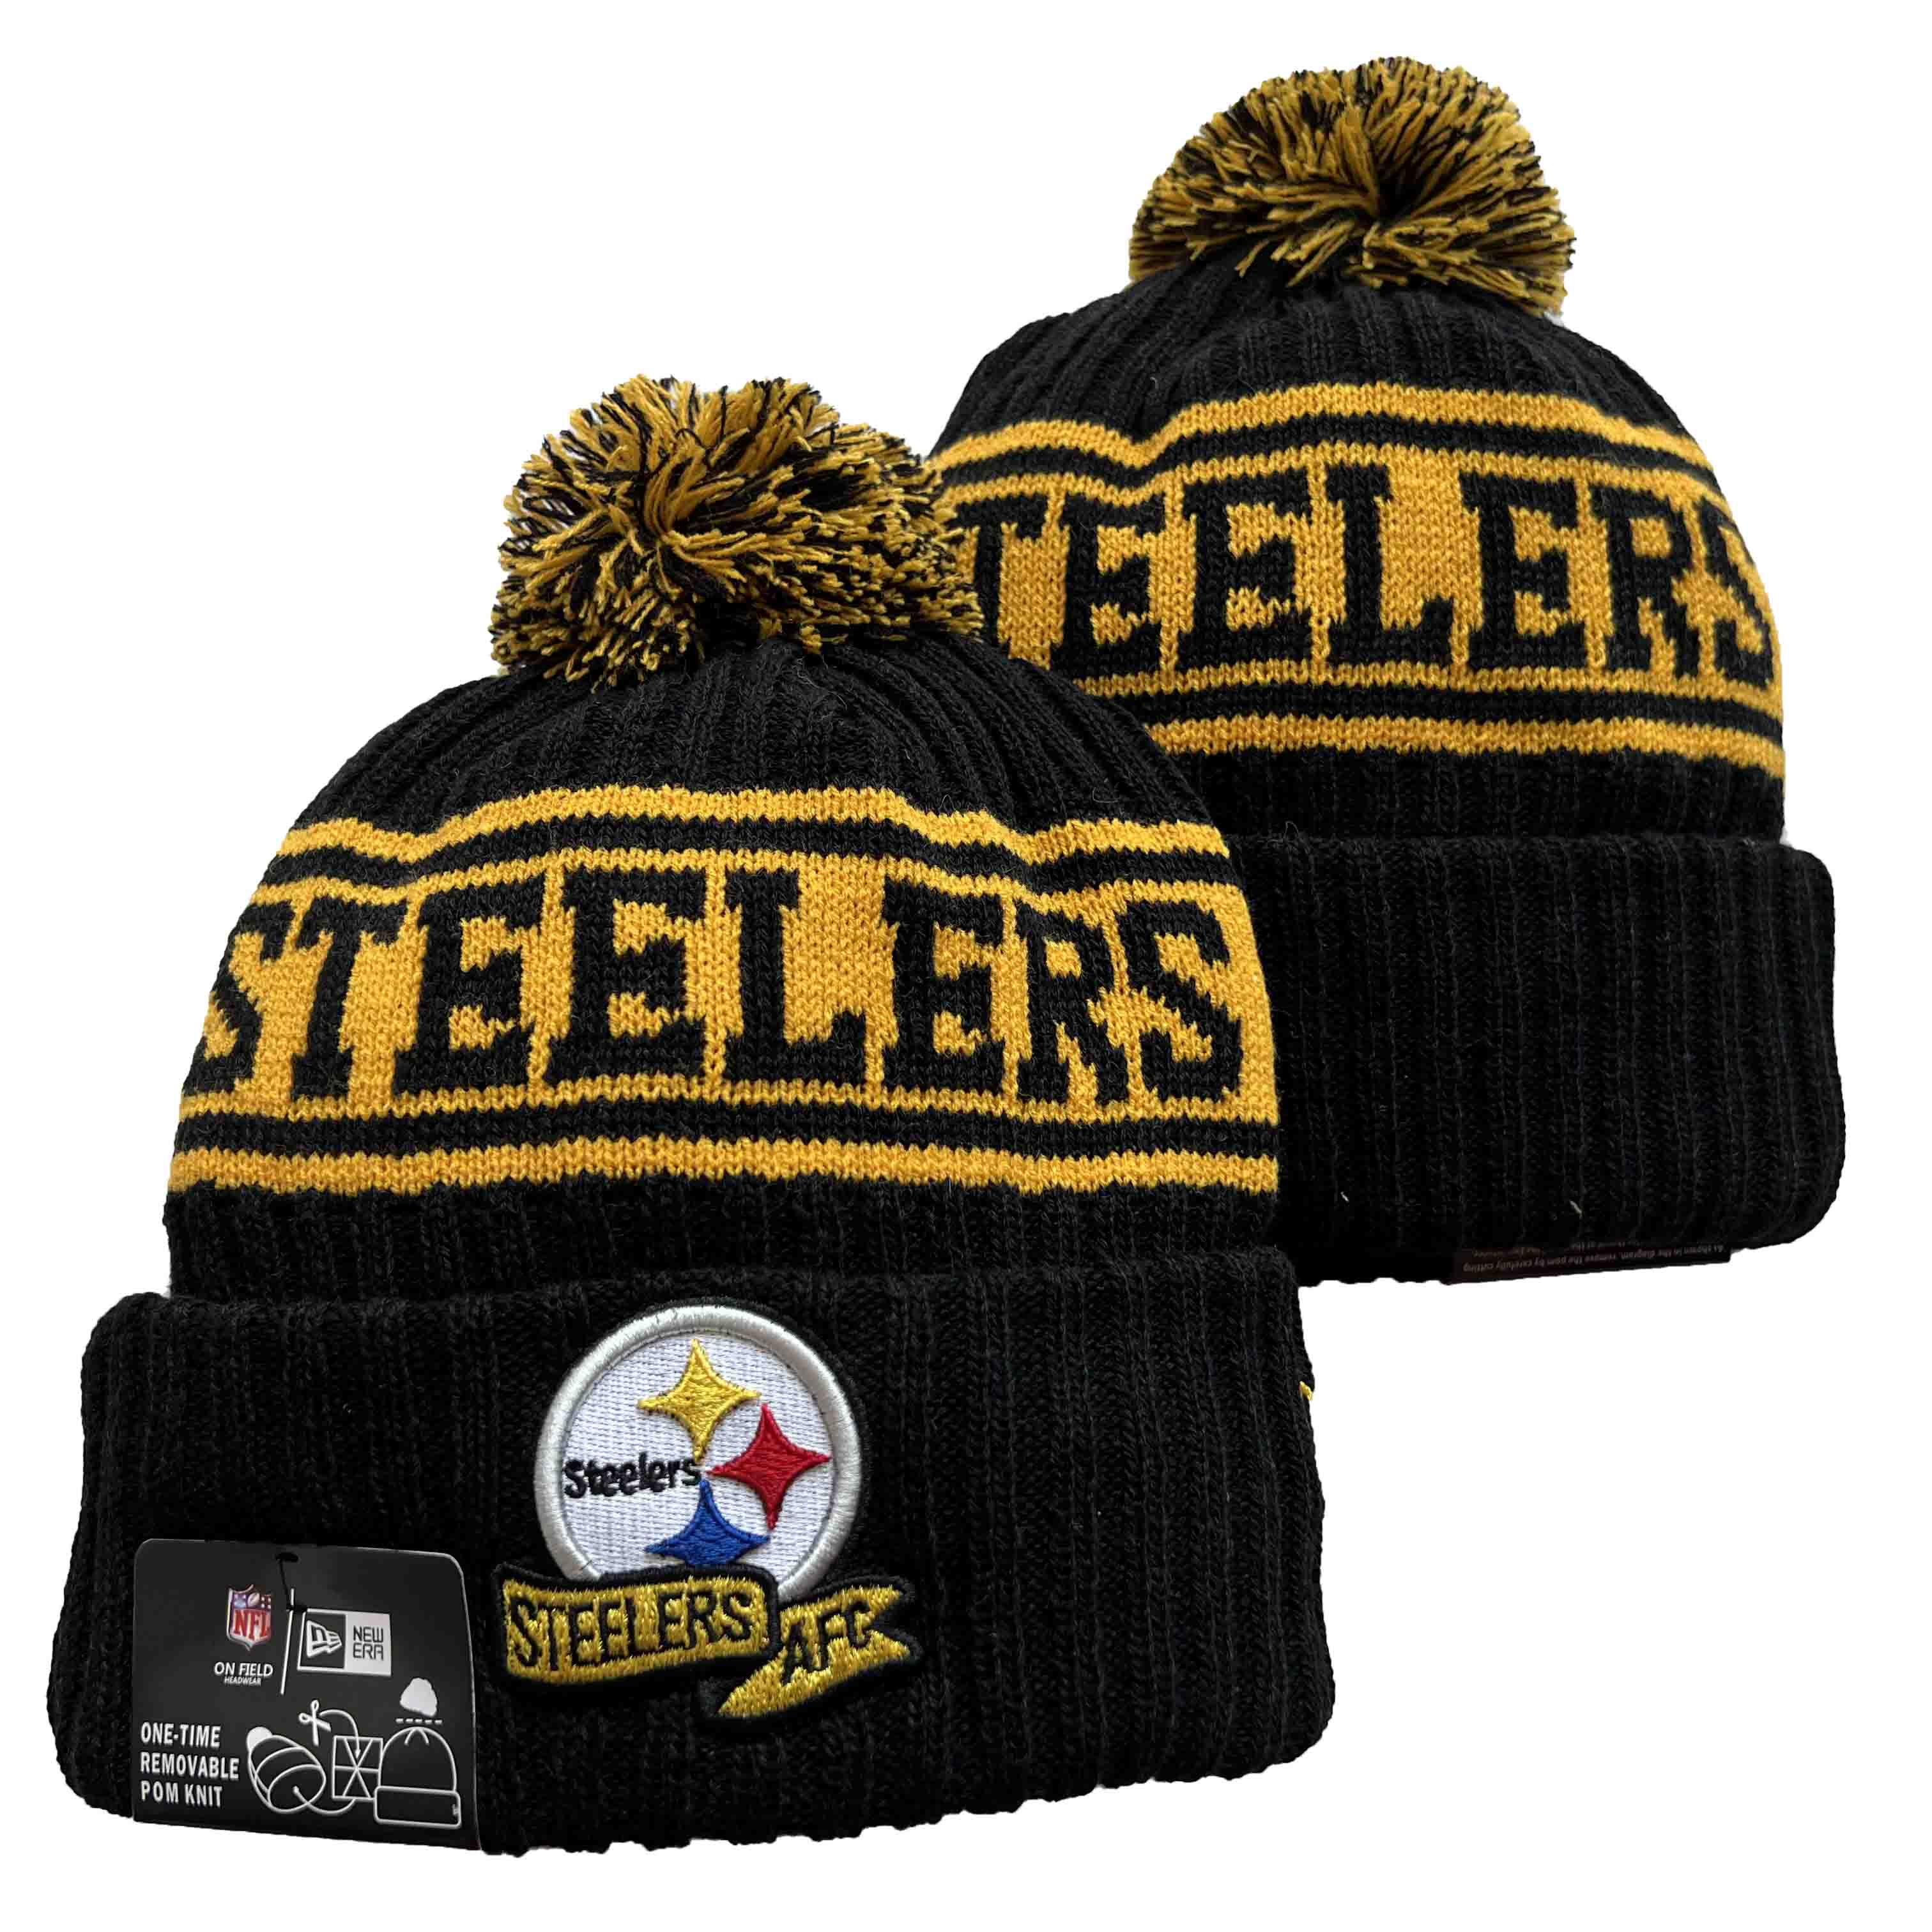 NFL Pittsburgh Steelers Beanies Knit Hats-YD1155